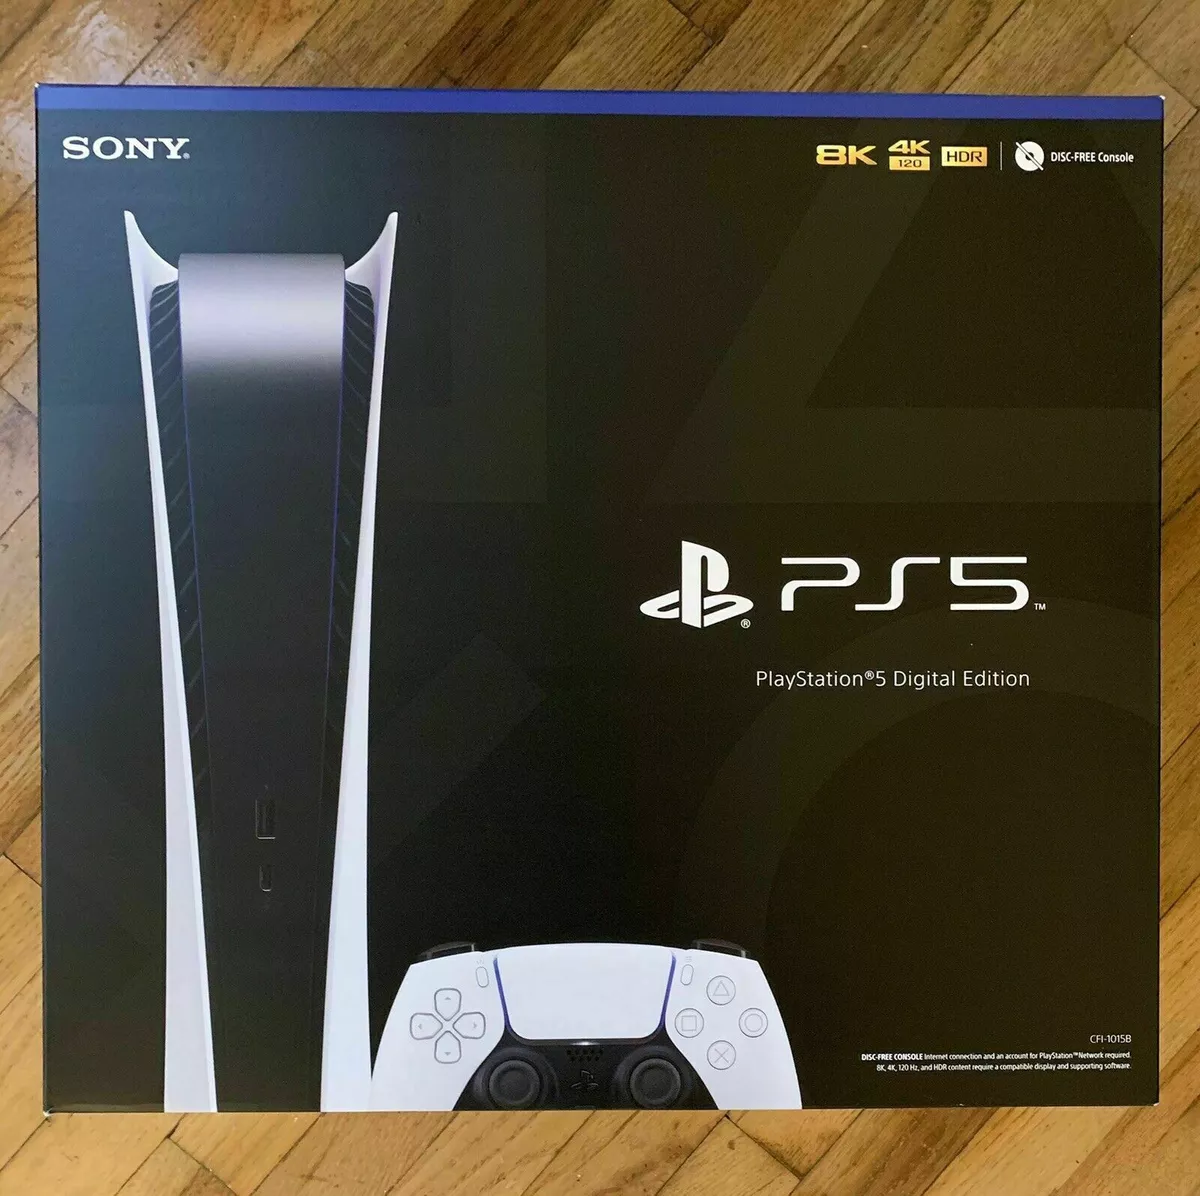 ✓ NEW SEALED Playstation (PS 5) Digital Edition Console System